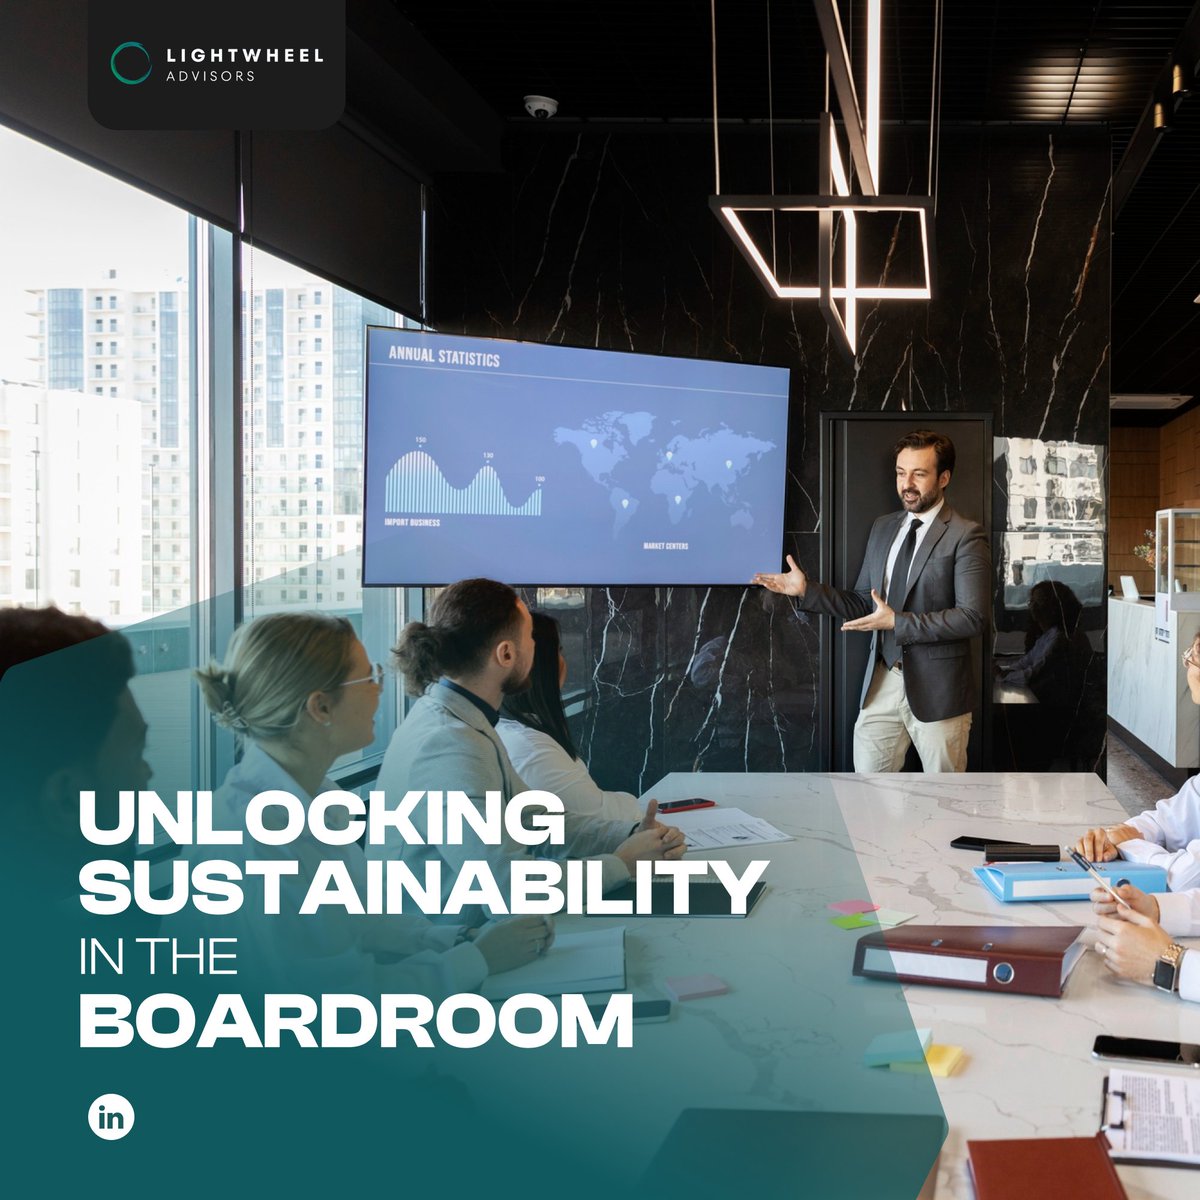 Explore sustainable boardroom practices for a brighter future. Learn key strategies and best practices driving positive environmental impact. Join the sustainability conversation now!🌱

corpgov.law.harvard.edu/2023/01/04/act…

#sustainability #boardroom #esg #sustainabilitymatters #trending